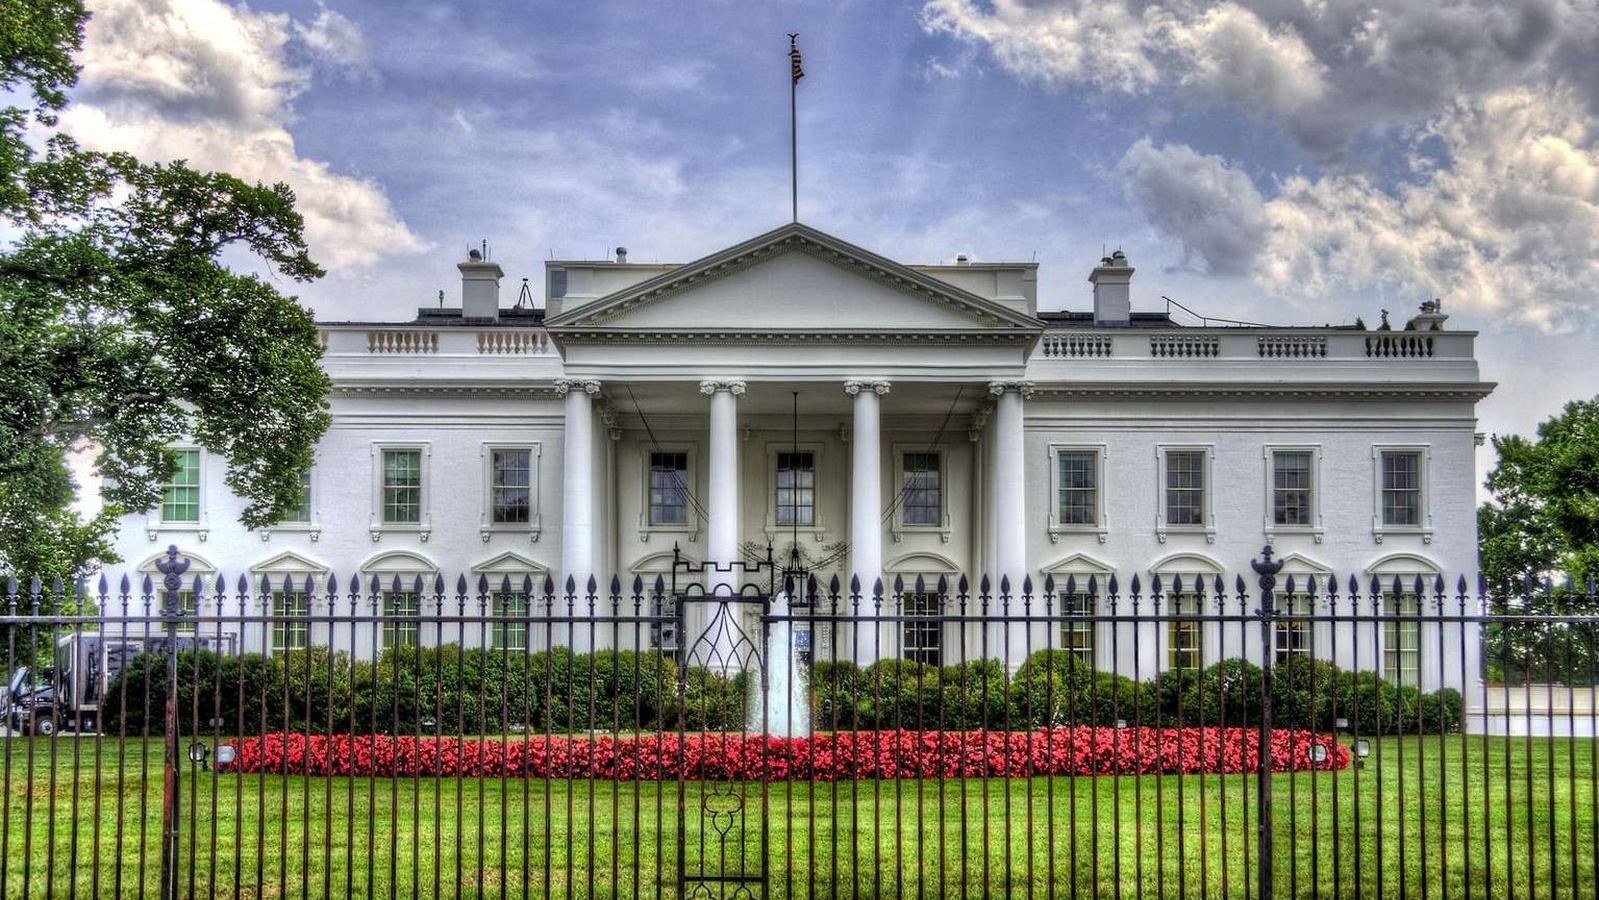 The White House behind a fence.